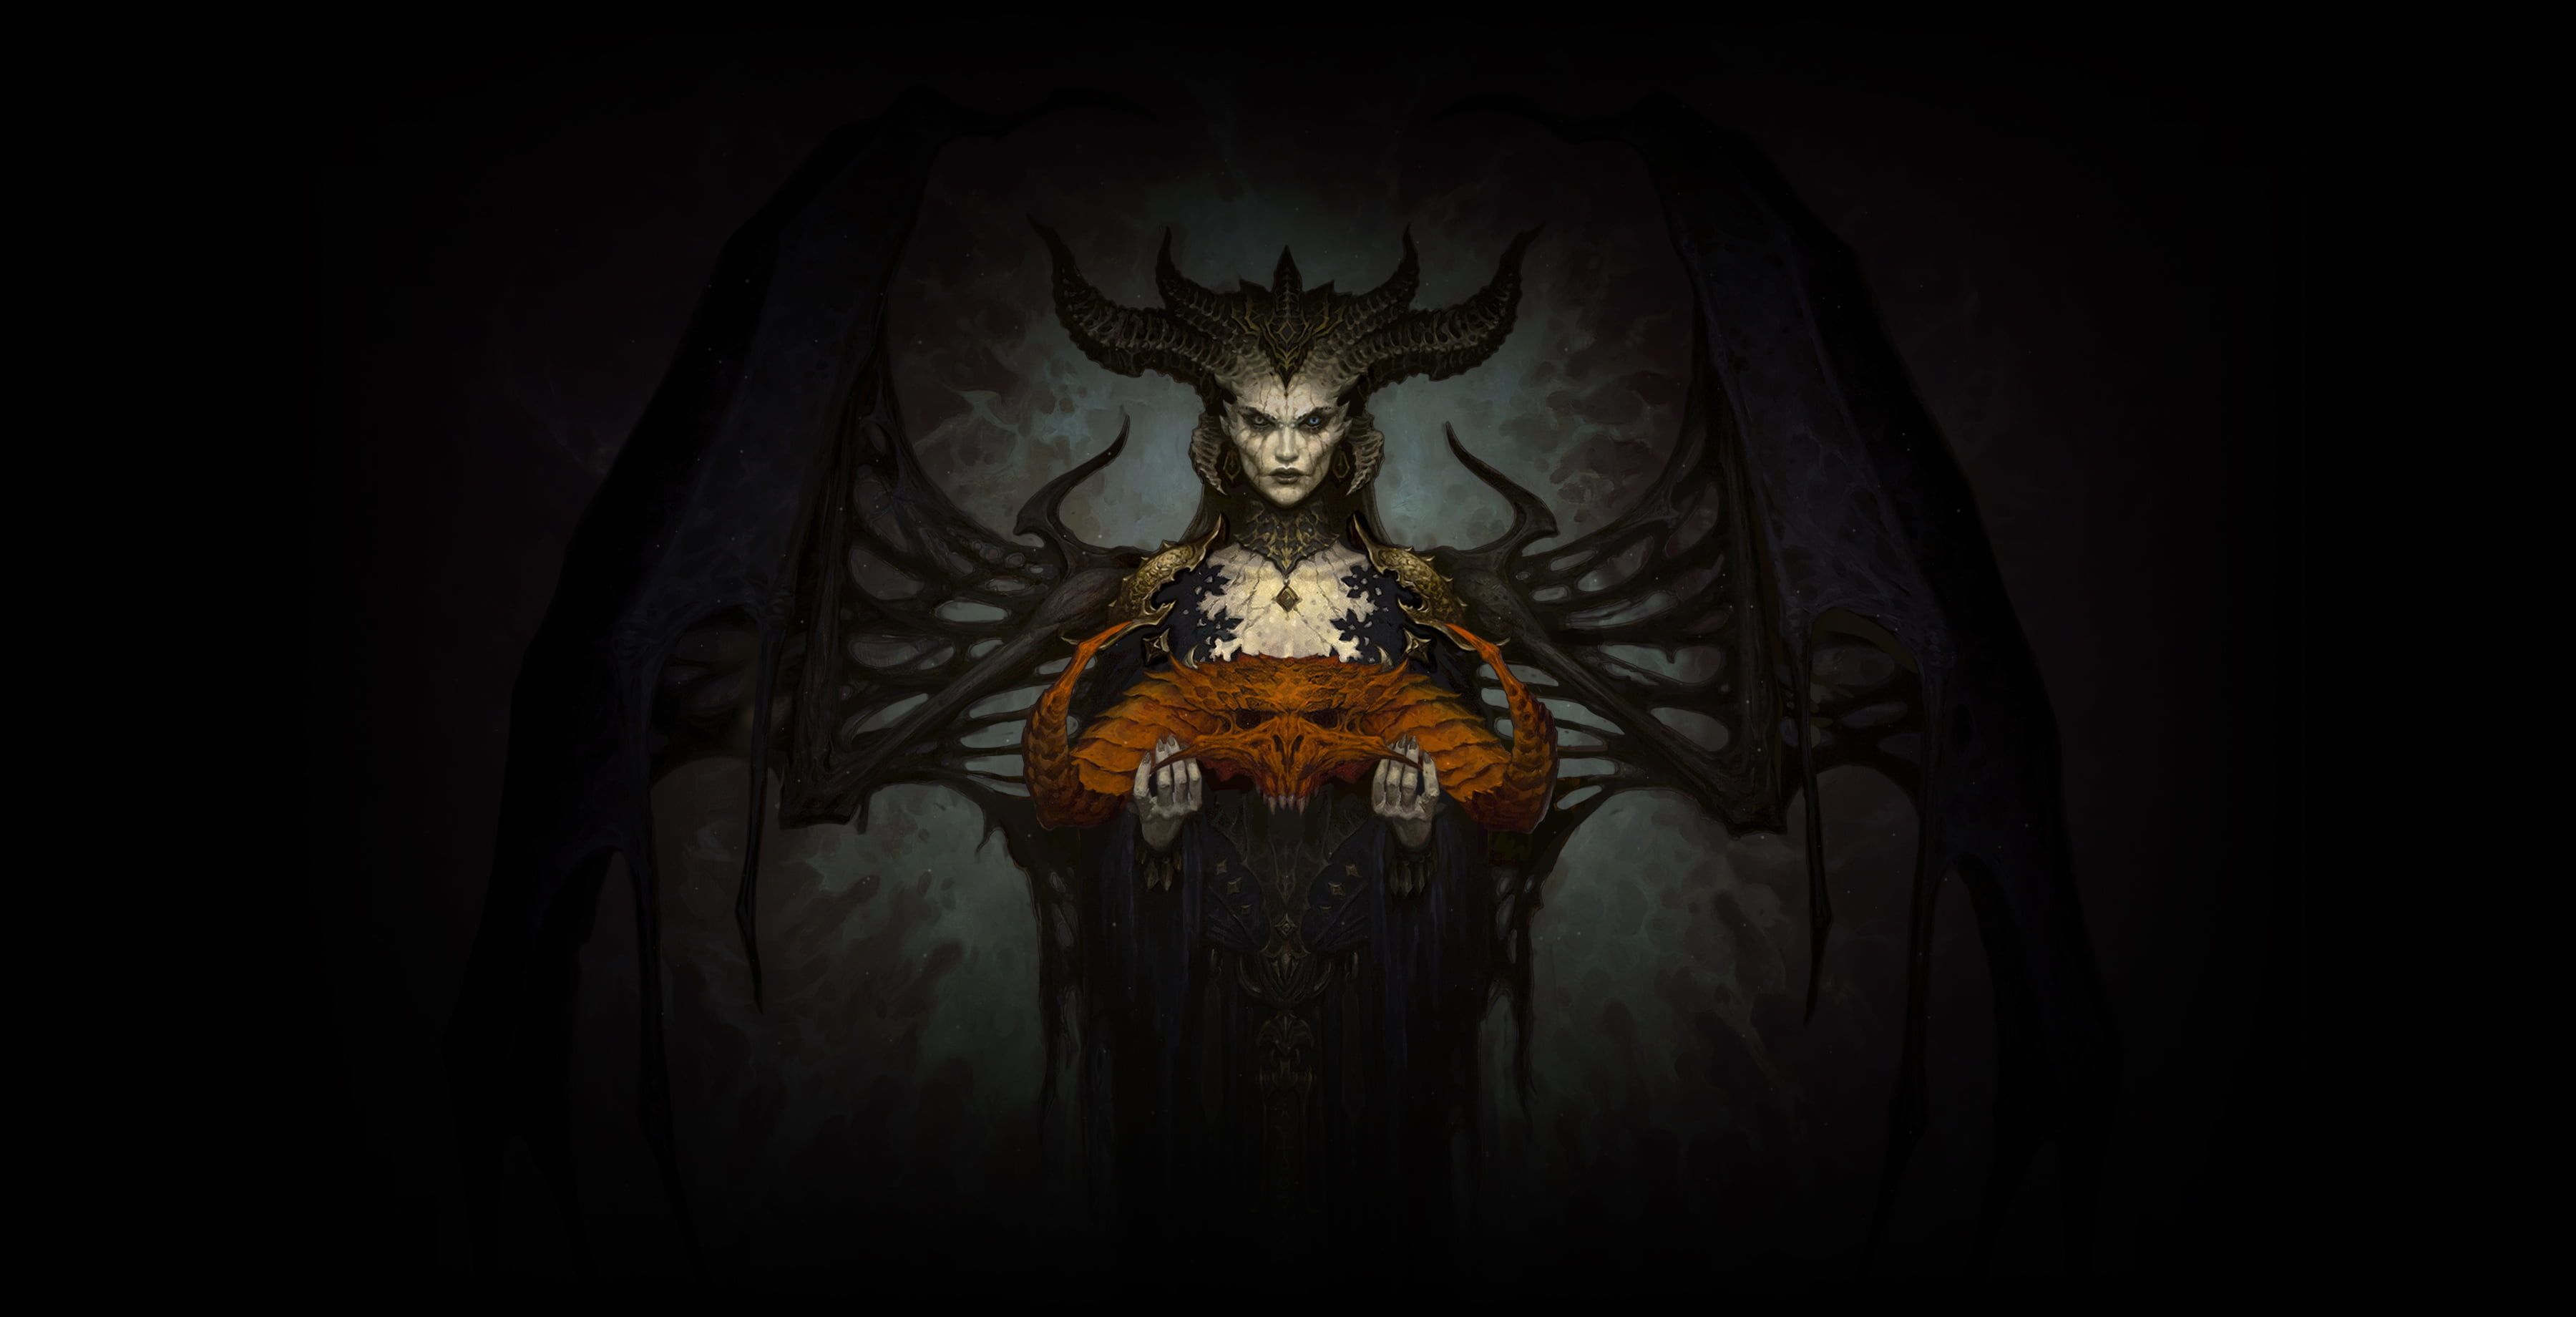 Diablo on X Drape your devices in doom Download these Diablo IV  wallpapers and watch as She graces your screen  httpstcoUigLmLIasC  httpstcoY9LDpckXVM  X